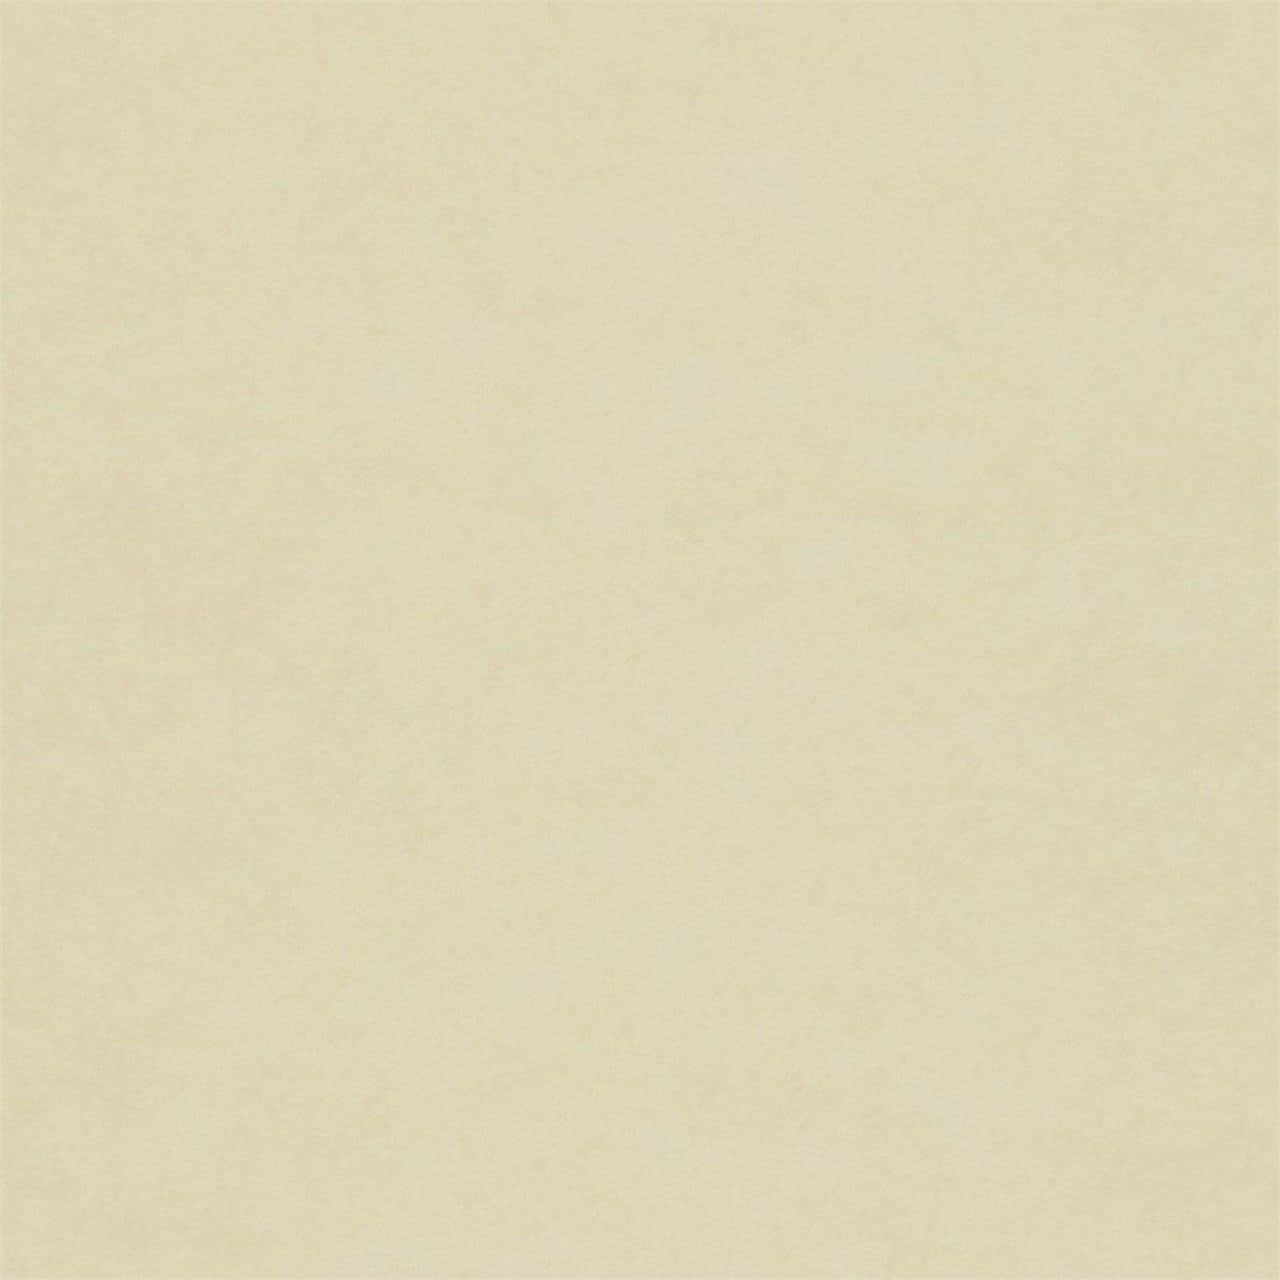 Parchment Paper Background Smooth Cream Background